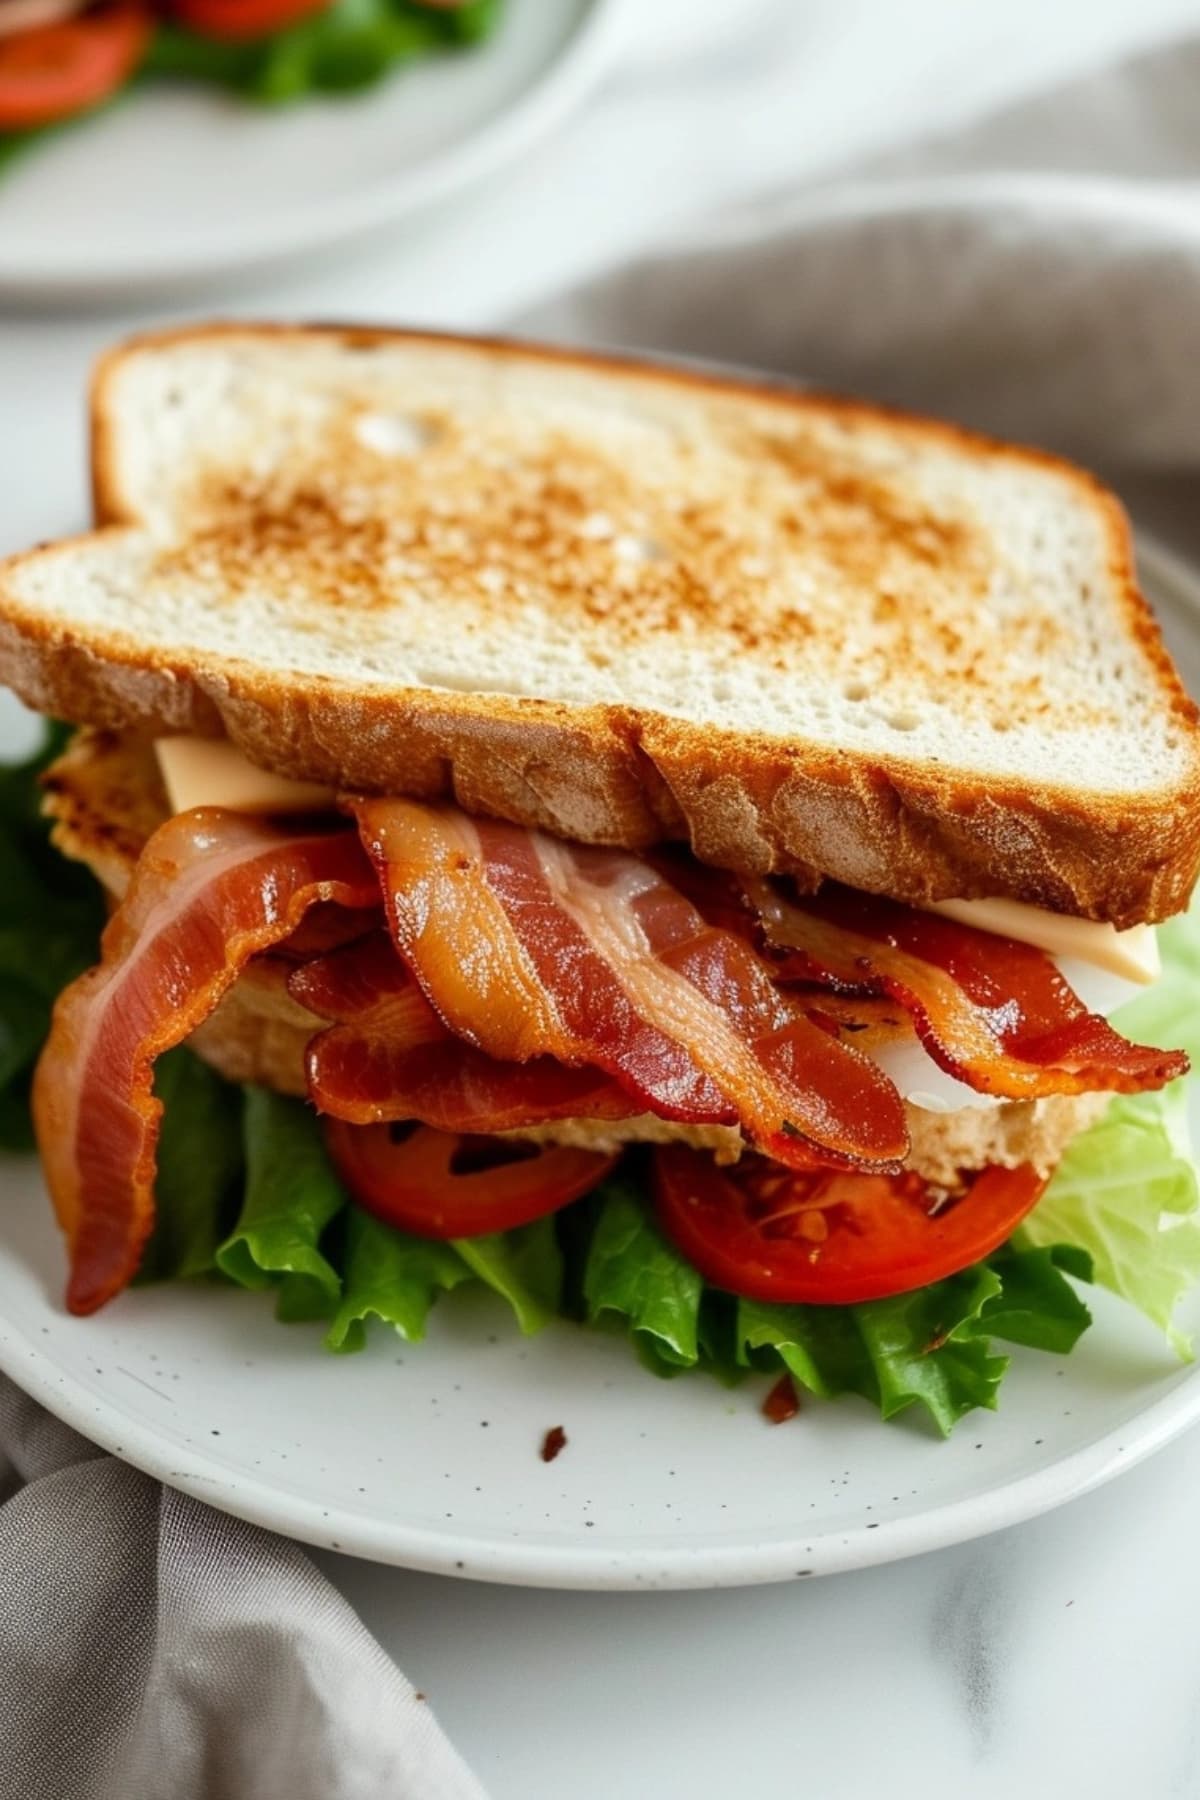 Sandwich with tomato, bacon and lettuce on a plate.